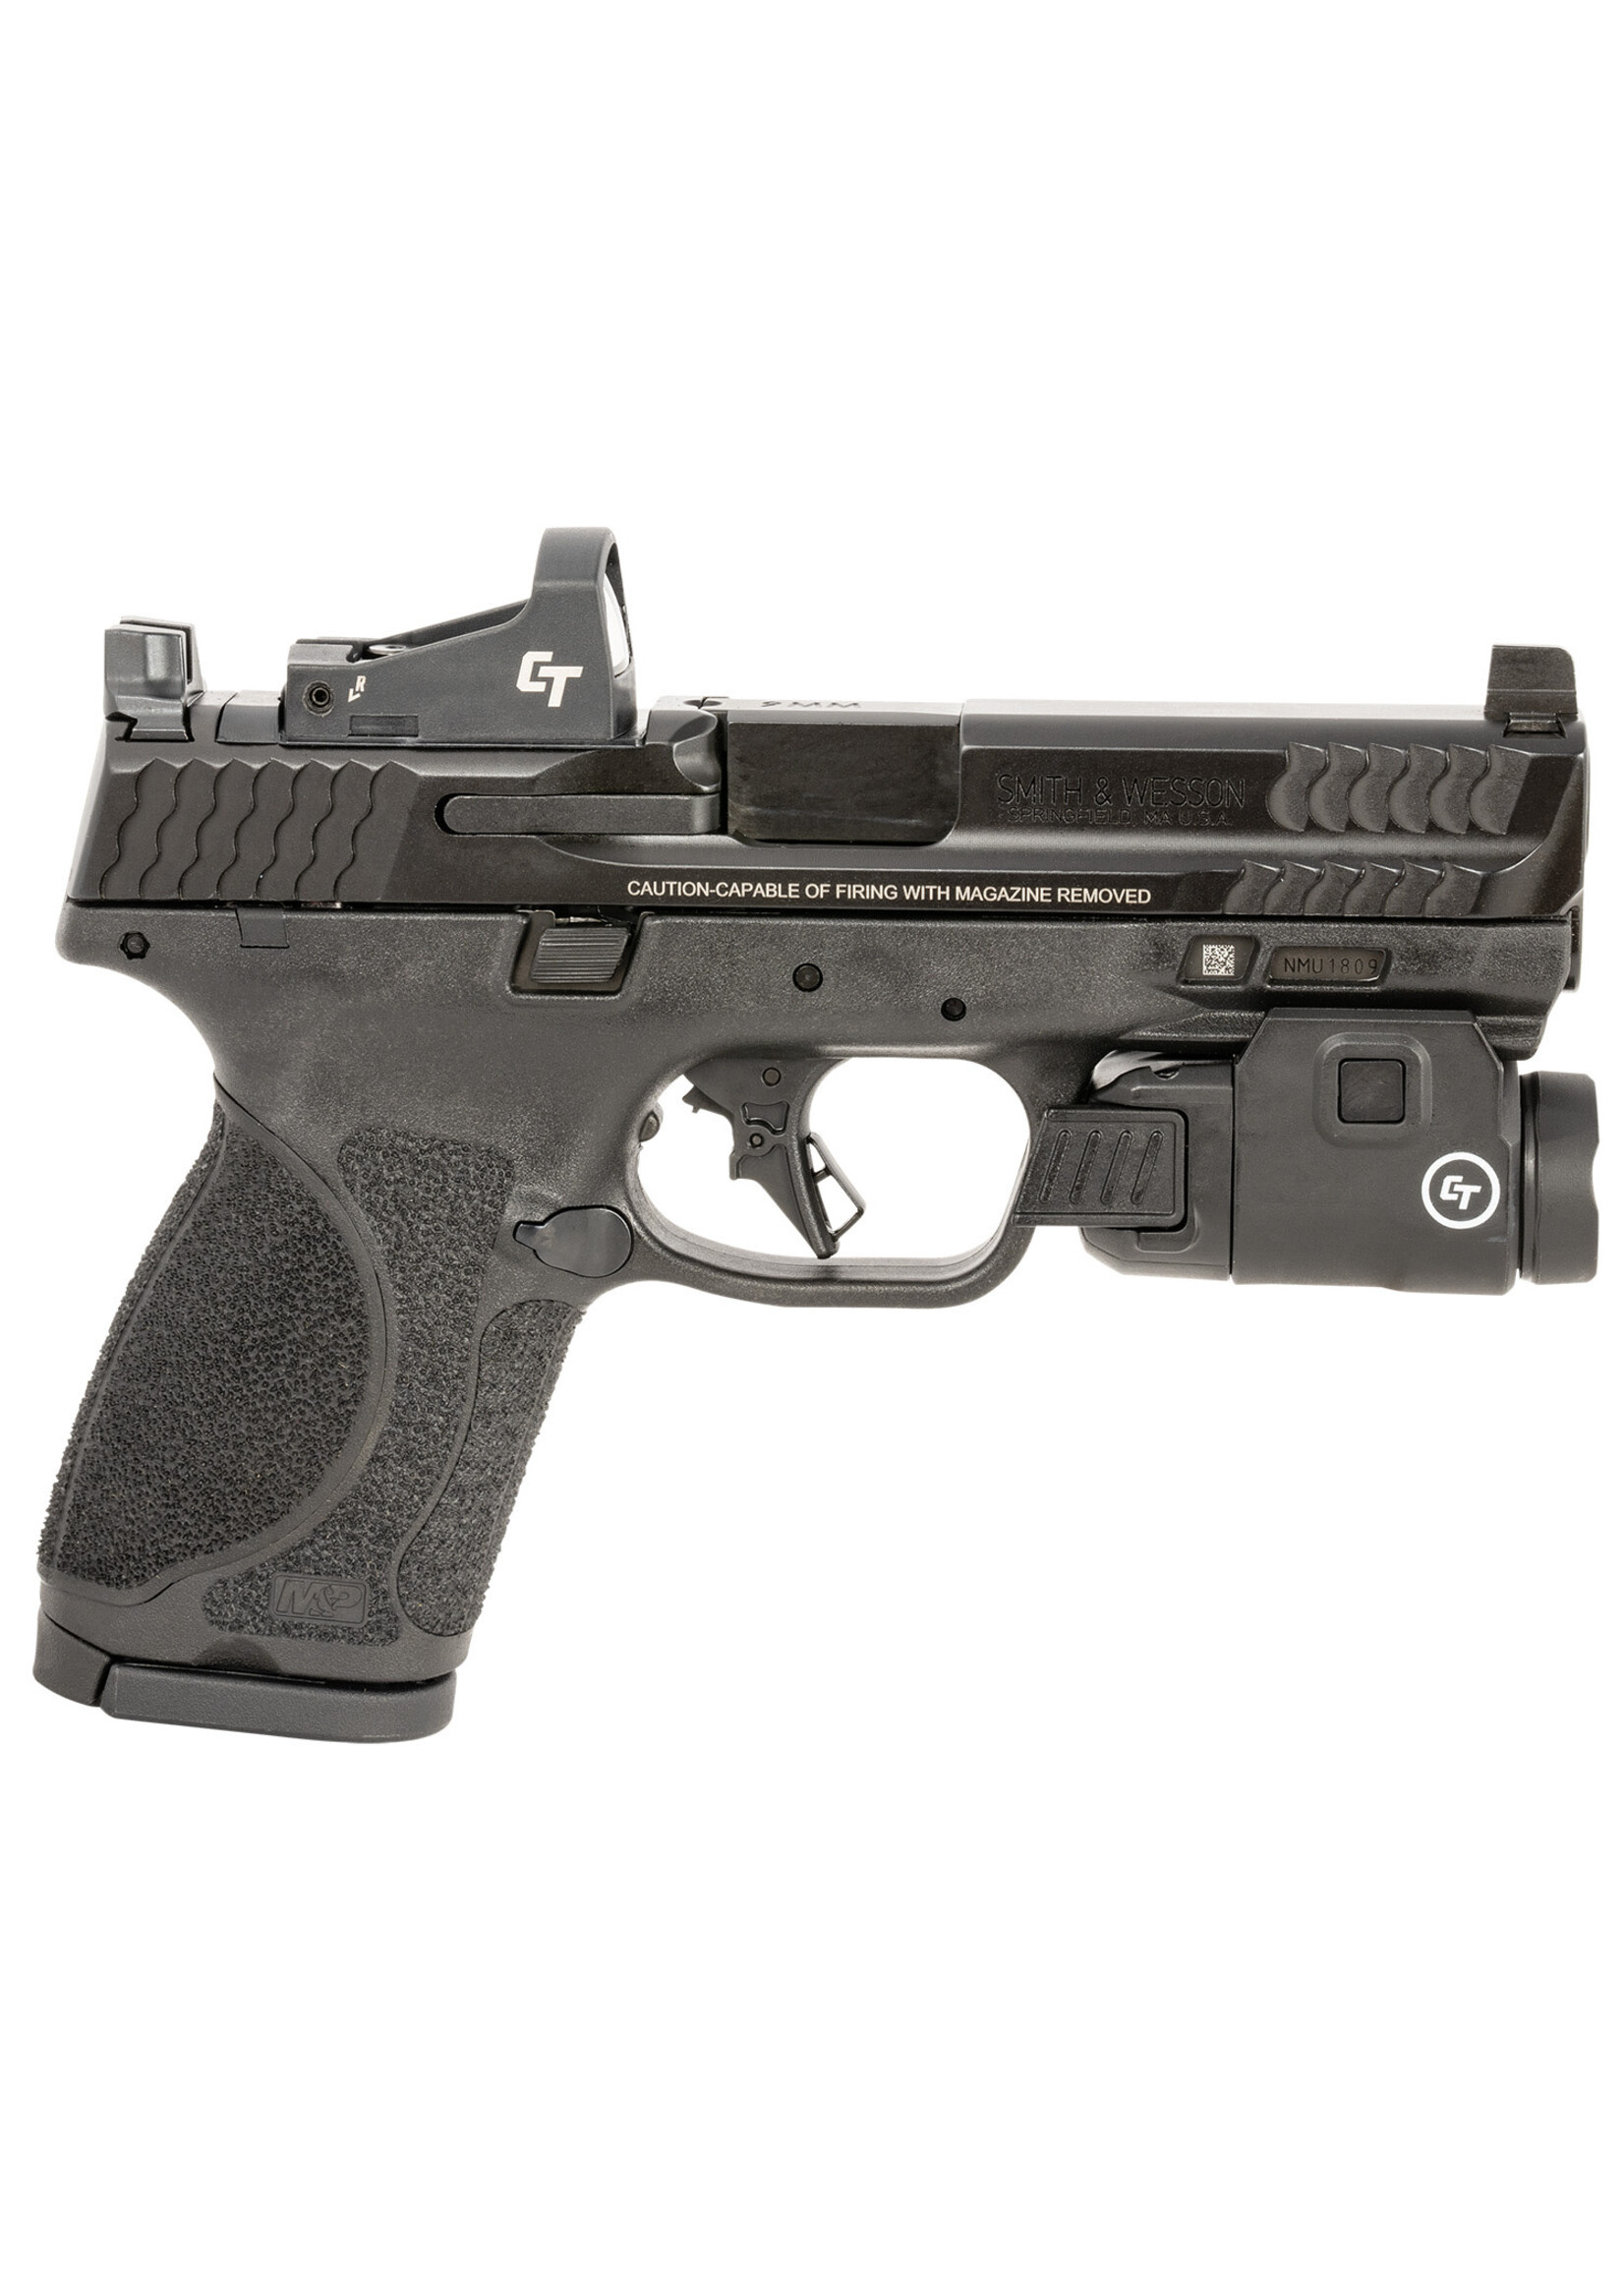 Smith and Wesson (S&W) SPECIAL ORDER Smith & Wesson 13948 M&P 2.0 Bundle Compact 9mm Luger 15+1 4" Black Steel Barrel, Black Armornite Optic Ready/Serrated Slide, Black Polymer Frame w/Picatinny Rail, Features Crimson Trace CMR-209 Rail Master Tactical Light &